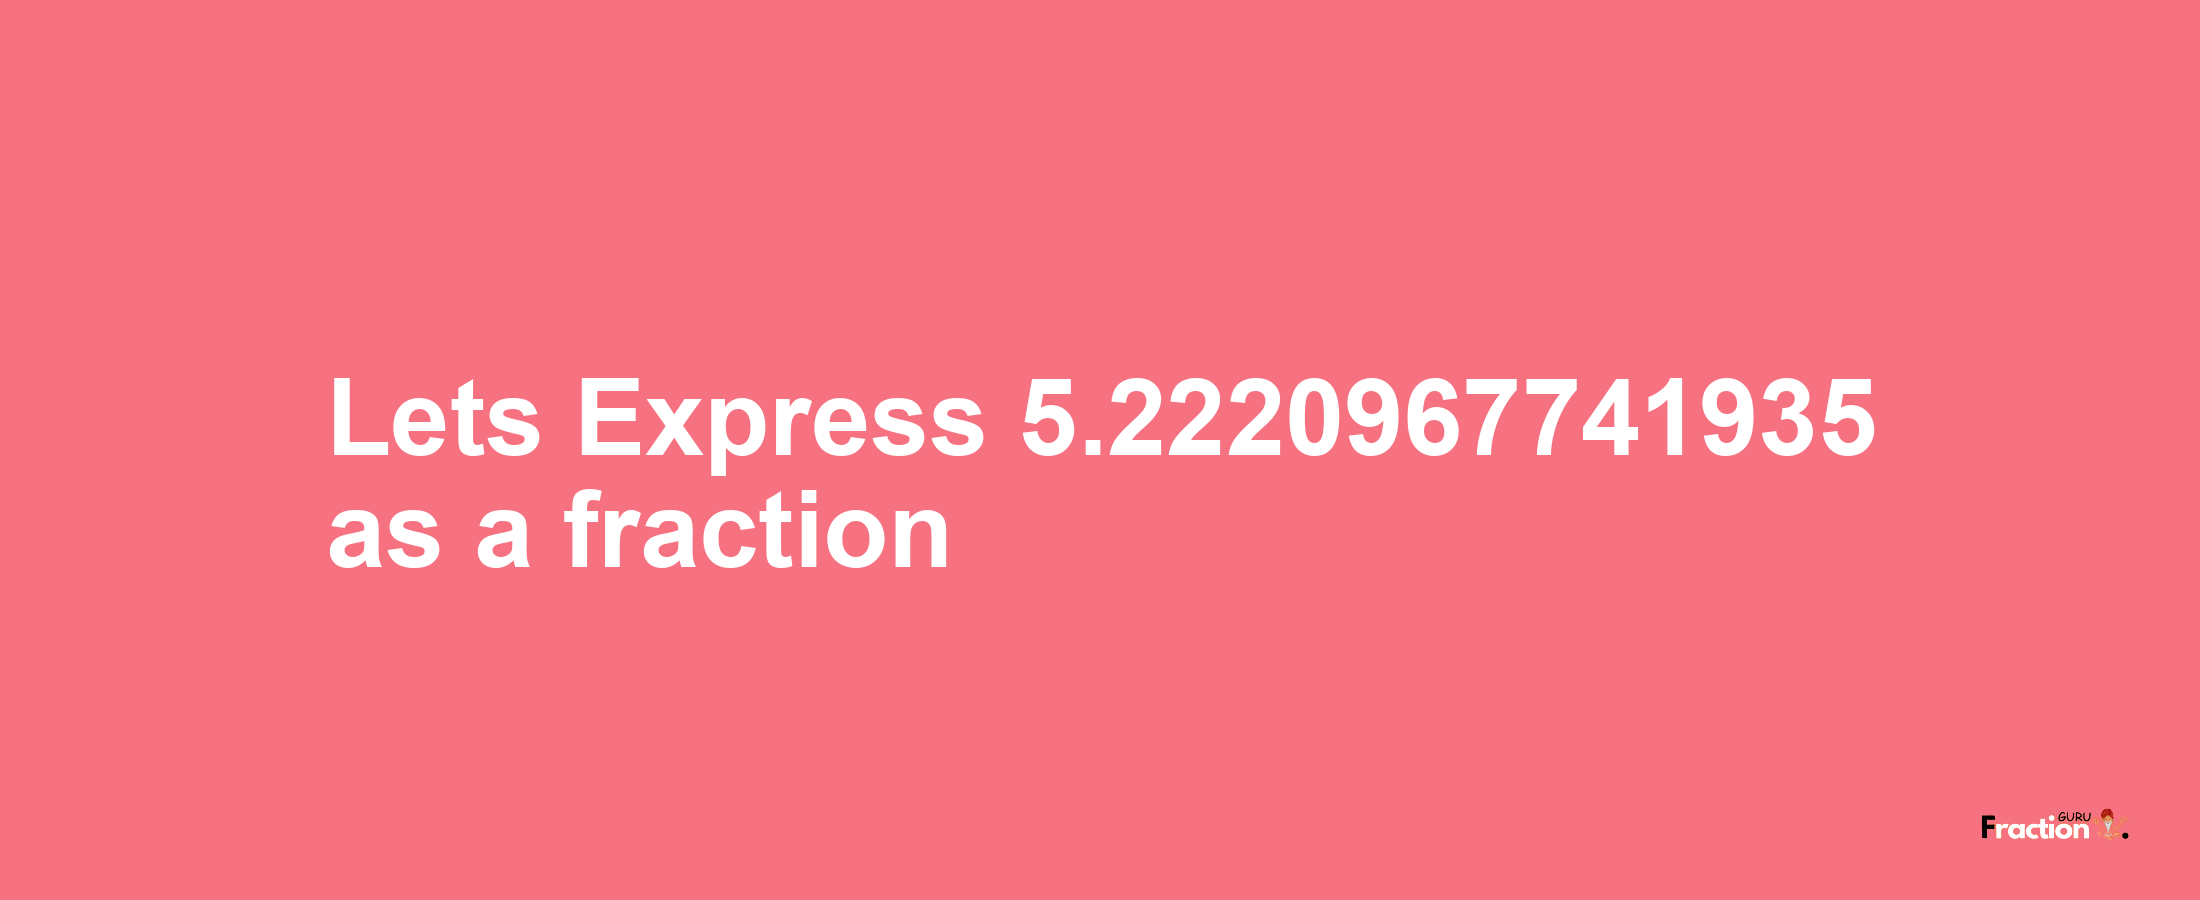 Lets Express 5.2220967741935 as afraction